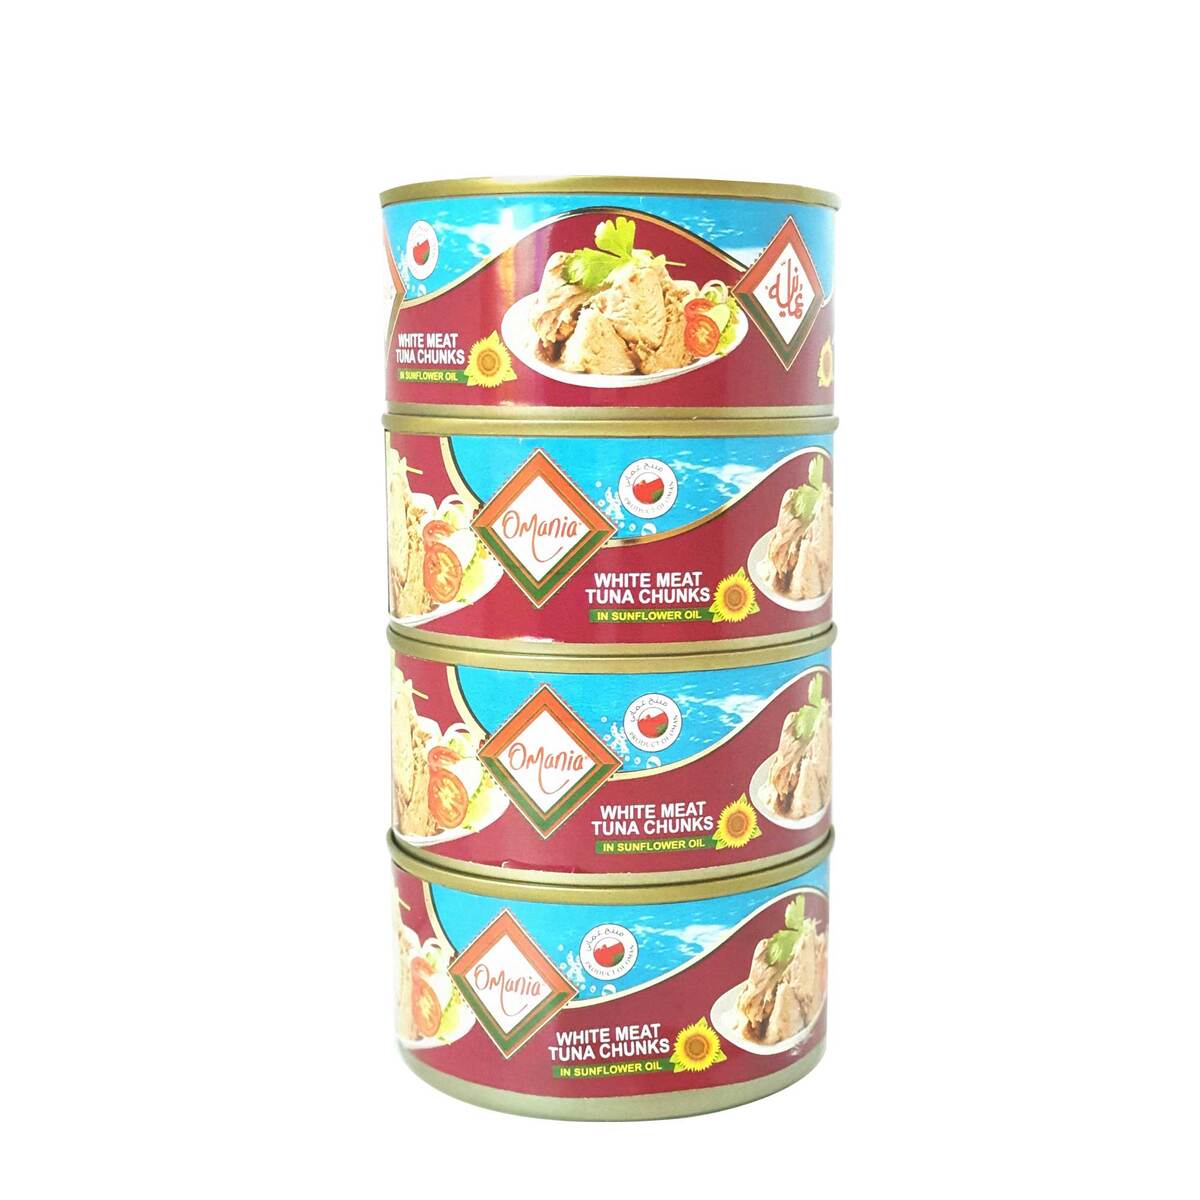 Omania White Meat Tuna Chunks In Sunflower Oil Value Pack 4 x 185g